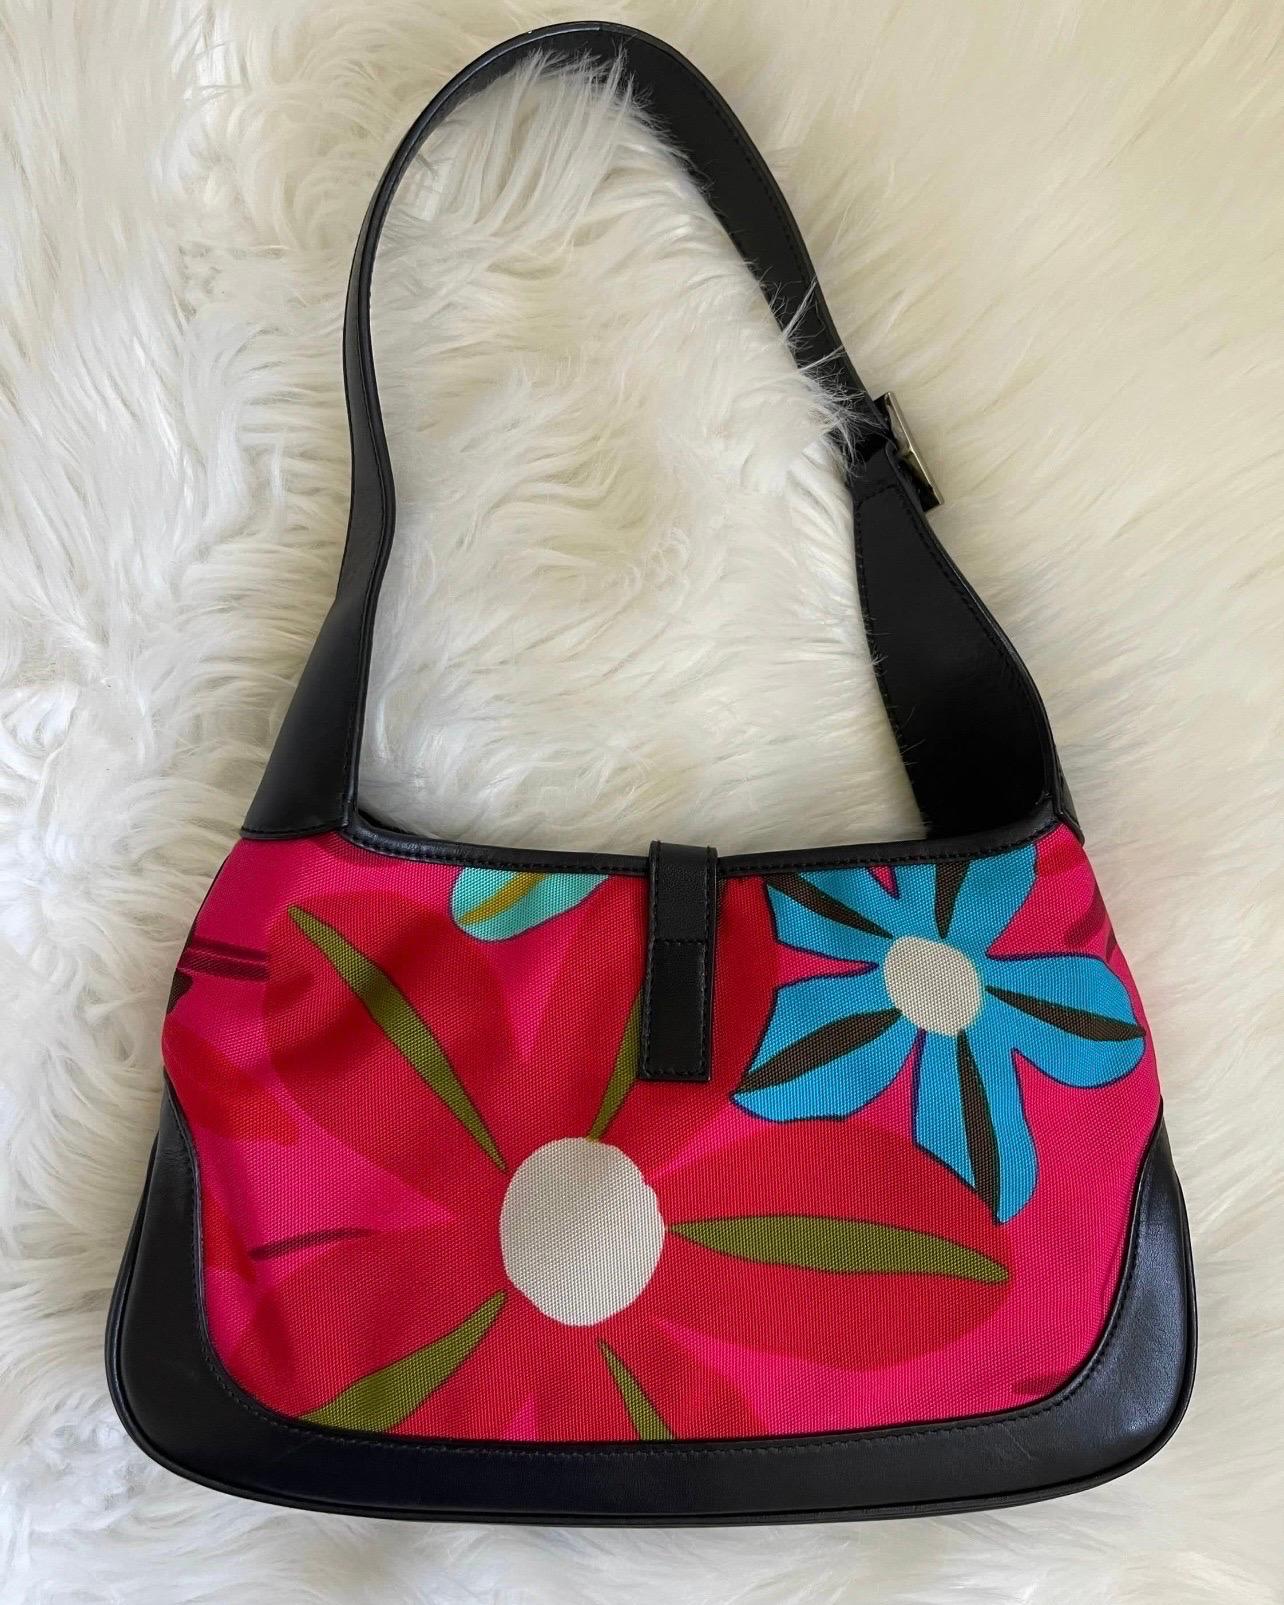 Immaculate GUCCI floral Jackie O bag. This is from the 1999 Spring collection designed by Tom Ford. GUCCI just released four of this exact vintage style in their vault. Silver tone piston lock hardware adorns the front of this striking shoulder bag.